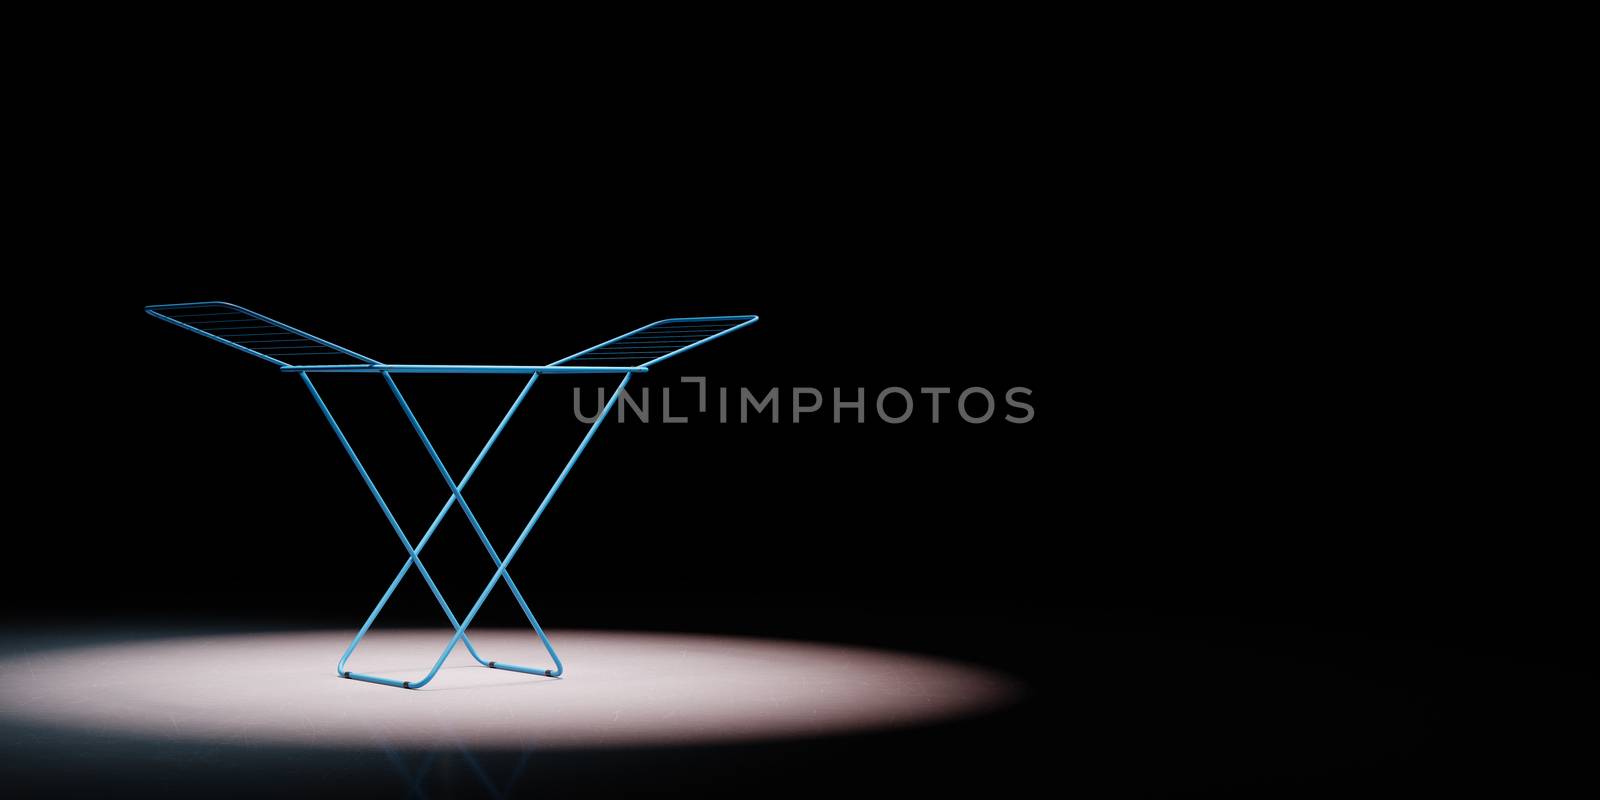 Clothes Drying Rack Spotlighted on Black Background by make